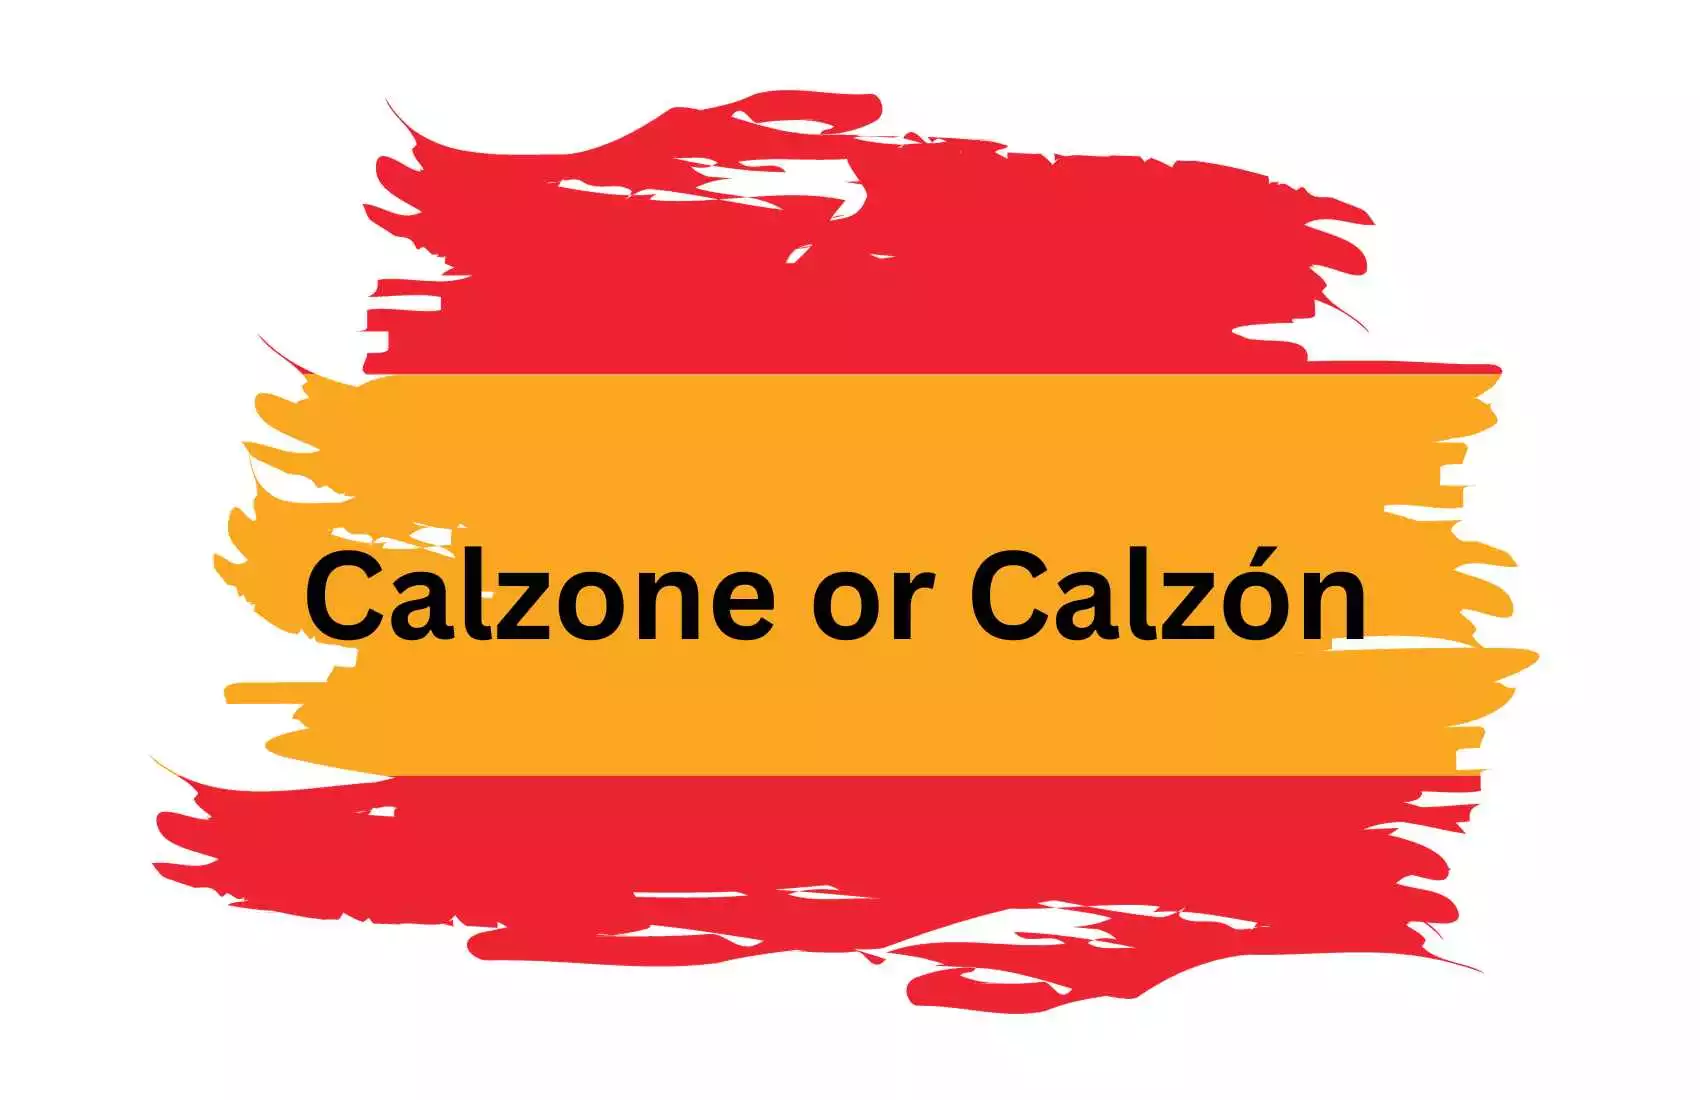 What Does Calzone or Calzón Mean in Spanish?